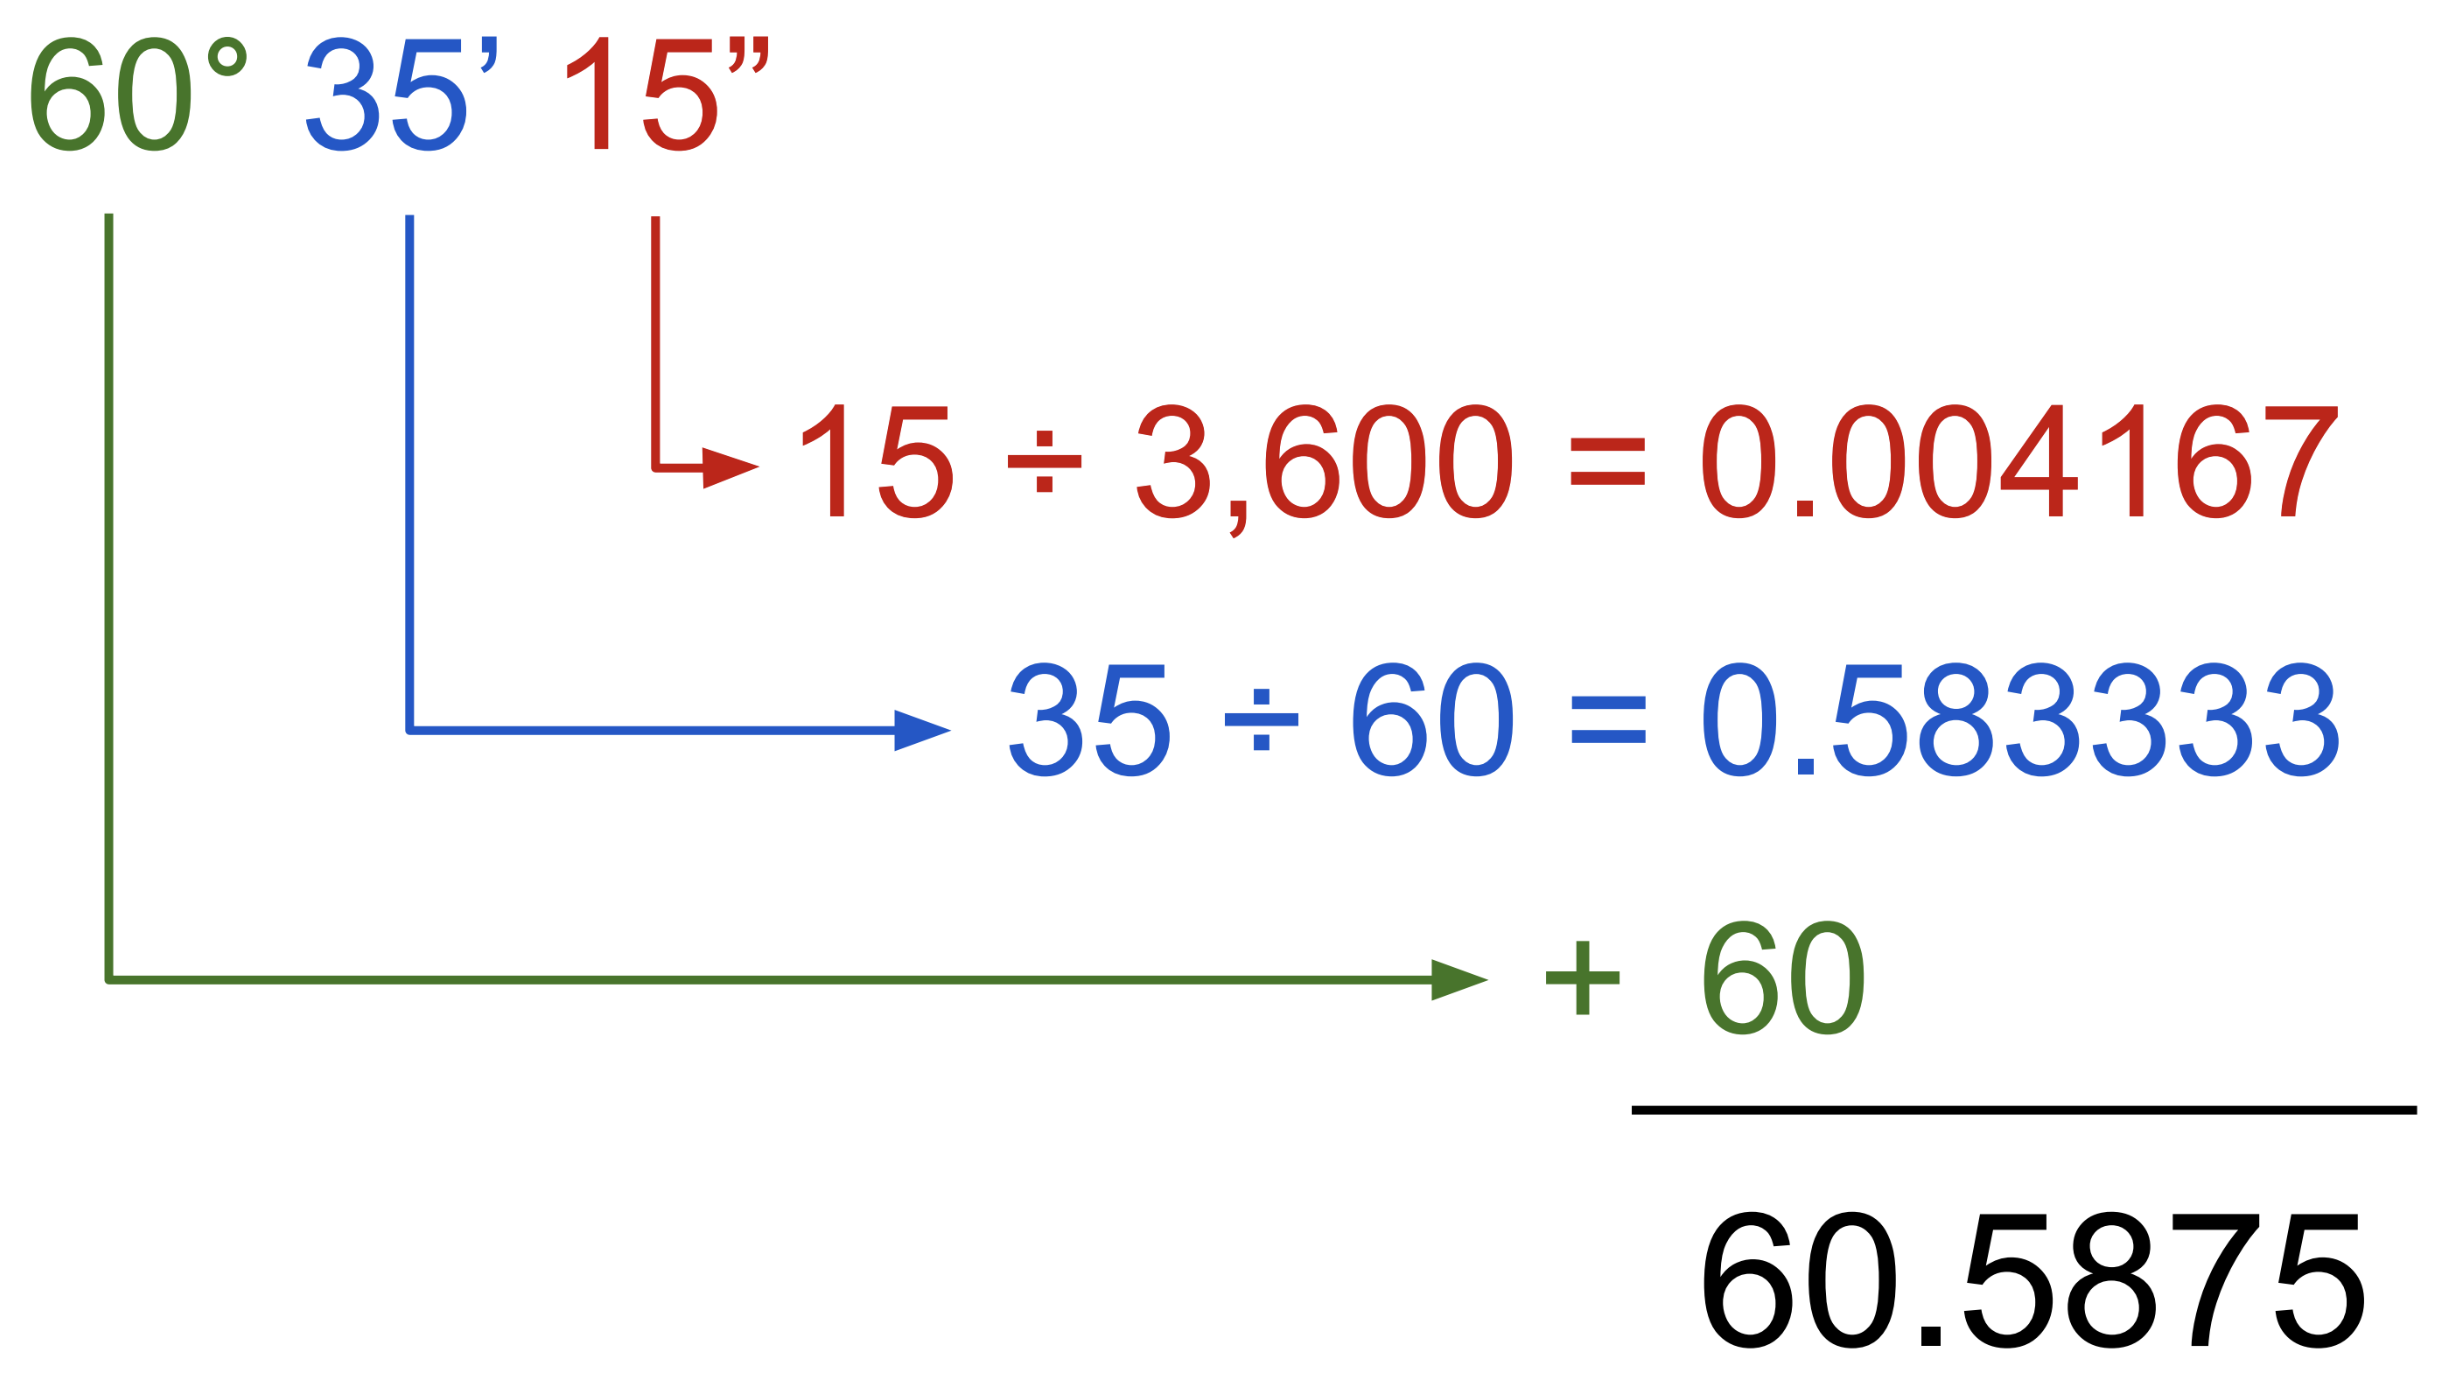 graphic showing how the equation to convert degrees, minutes, and seconds to decimal works